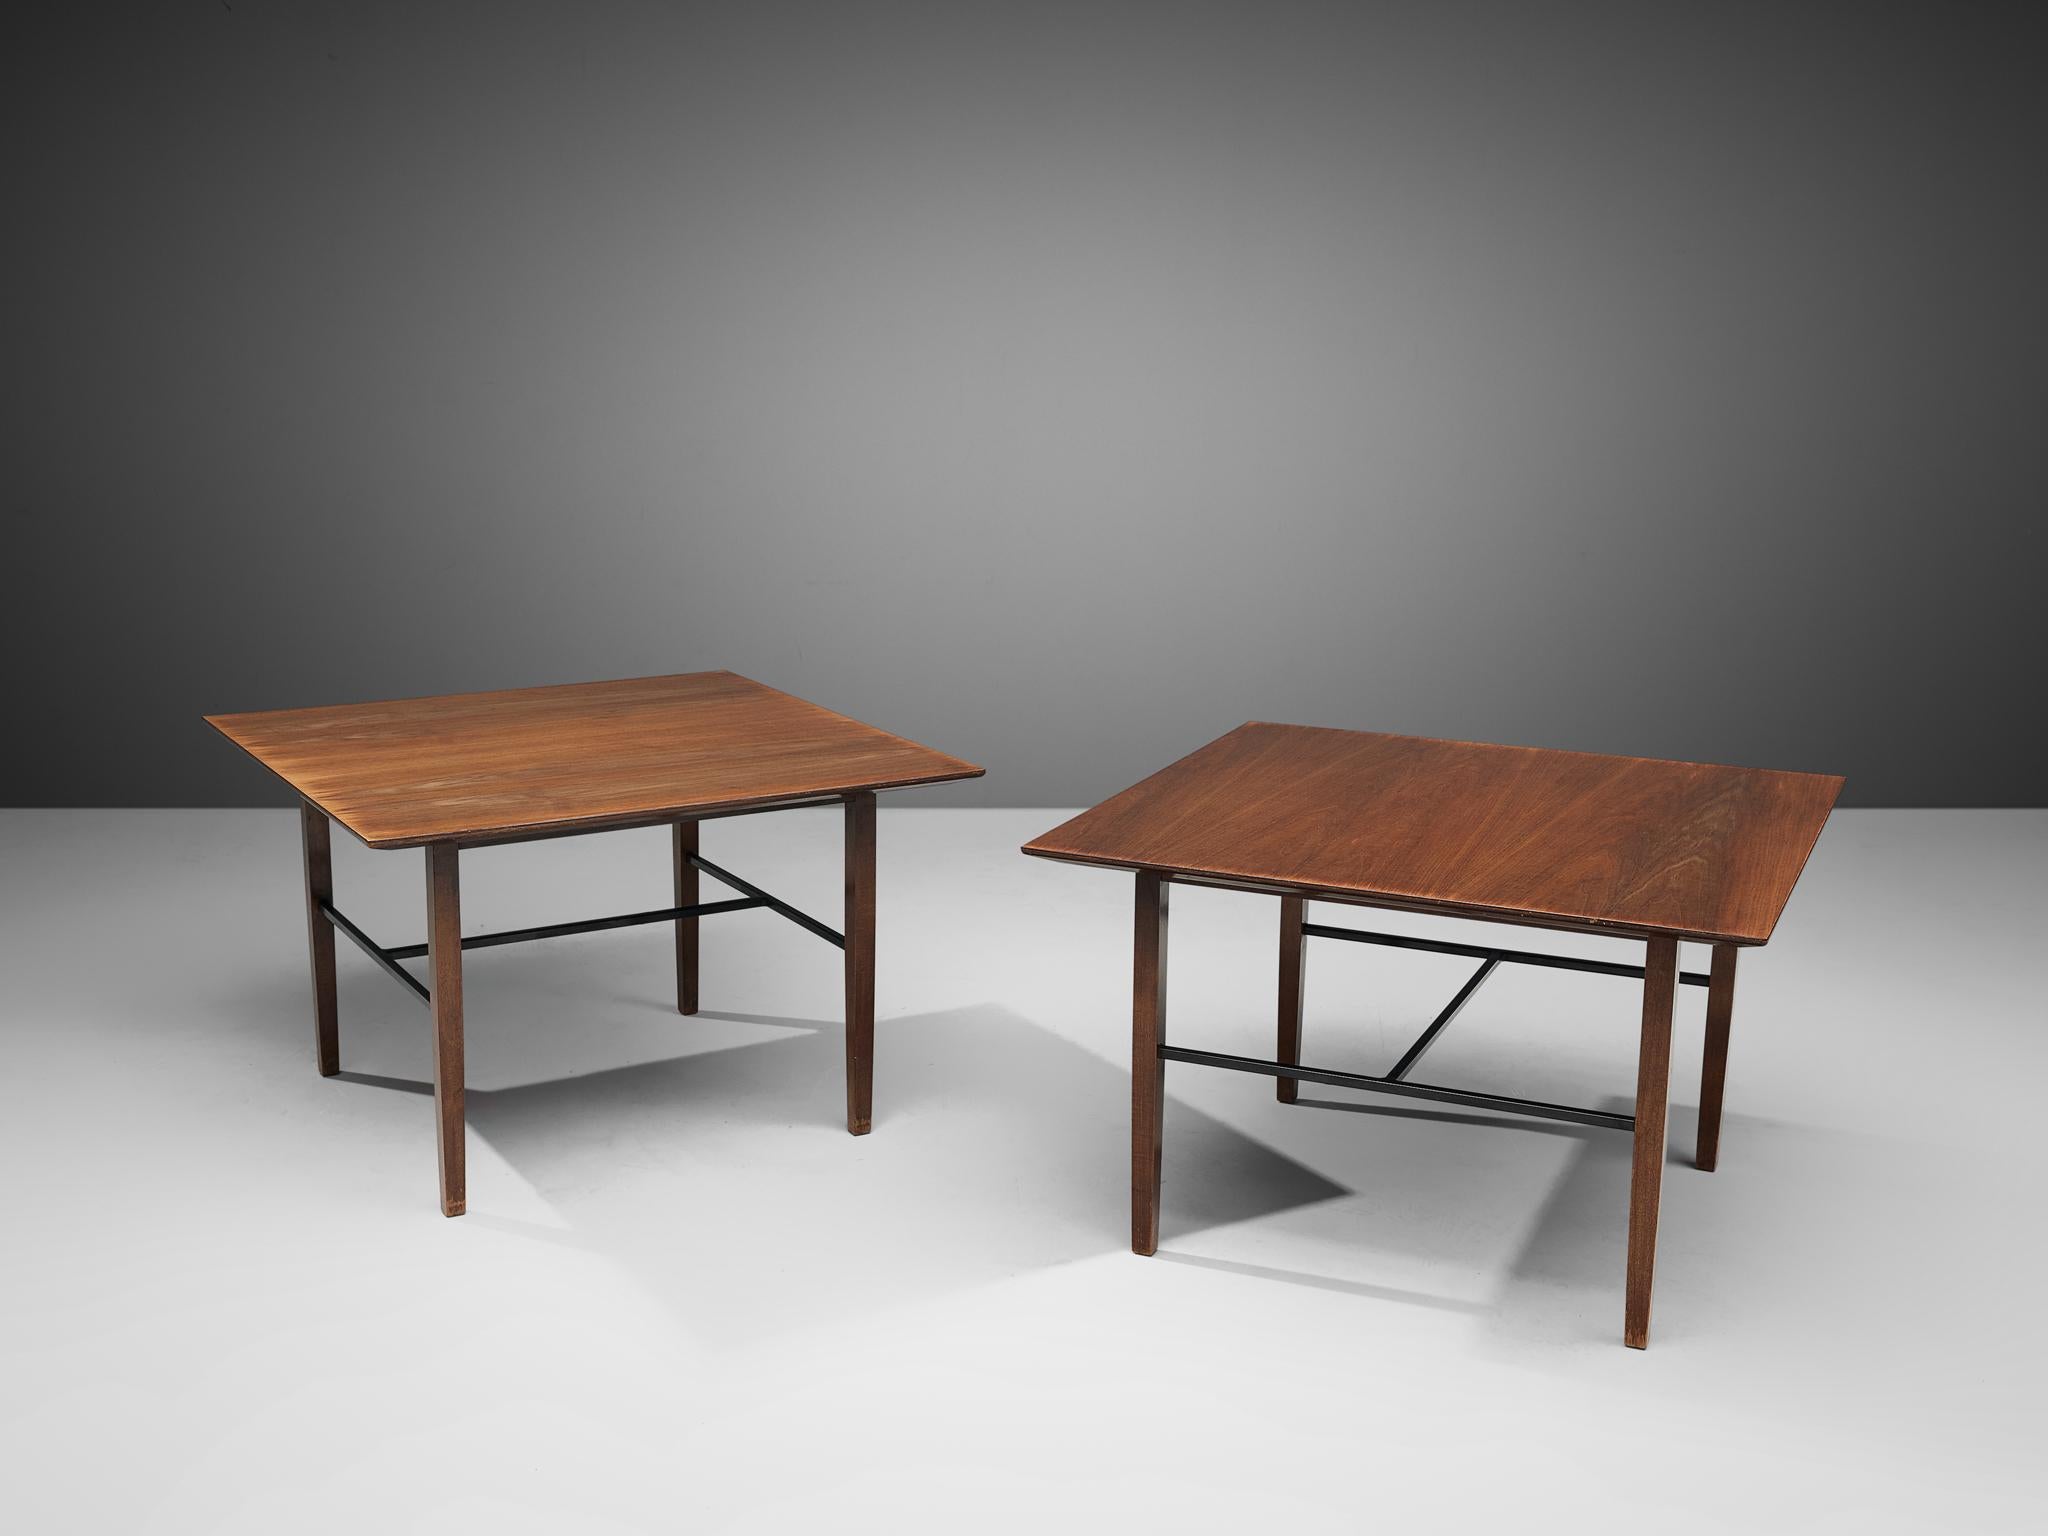 Harry Bertoia for Florence Knoll, set of side tables, model 560, walnut, metal, United States, 1960s

Exquisite and rare set of side tables is designed by Harry Bertoia and manufactured by Florence Knoll in the 1960s. This model is featured in the